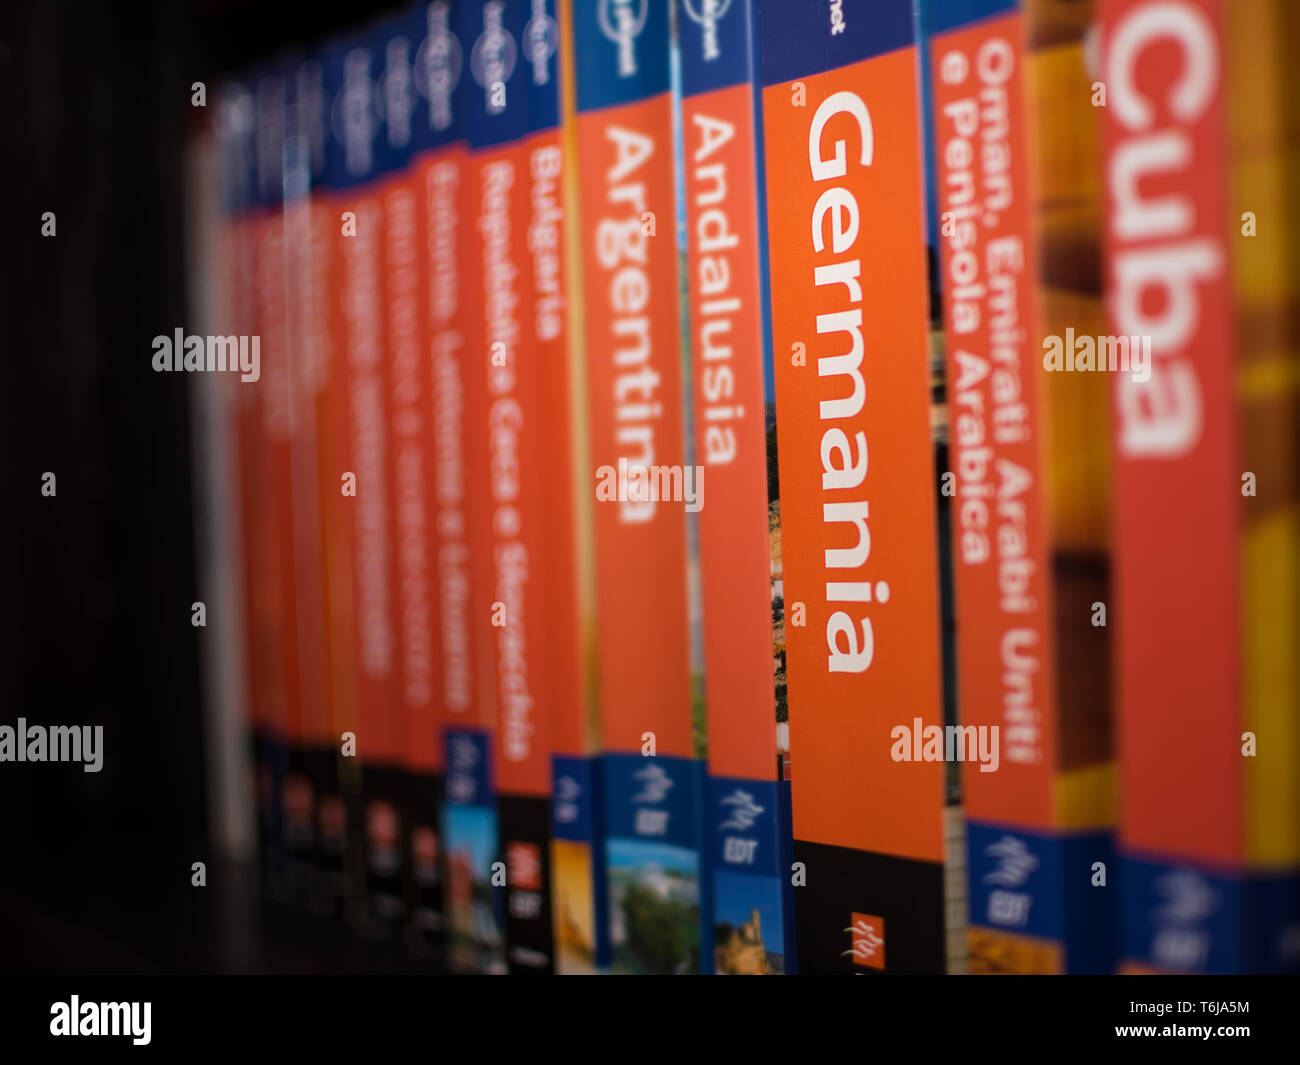 Chieti, Italy - April 4, 2019: Books of the Lonely Planet series on the bookcase with only the book of Germany in focus, with nobody Stock Photo